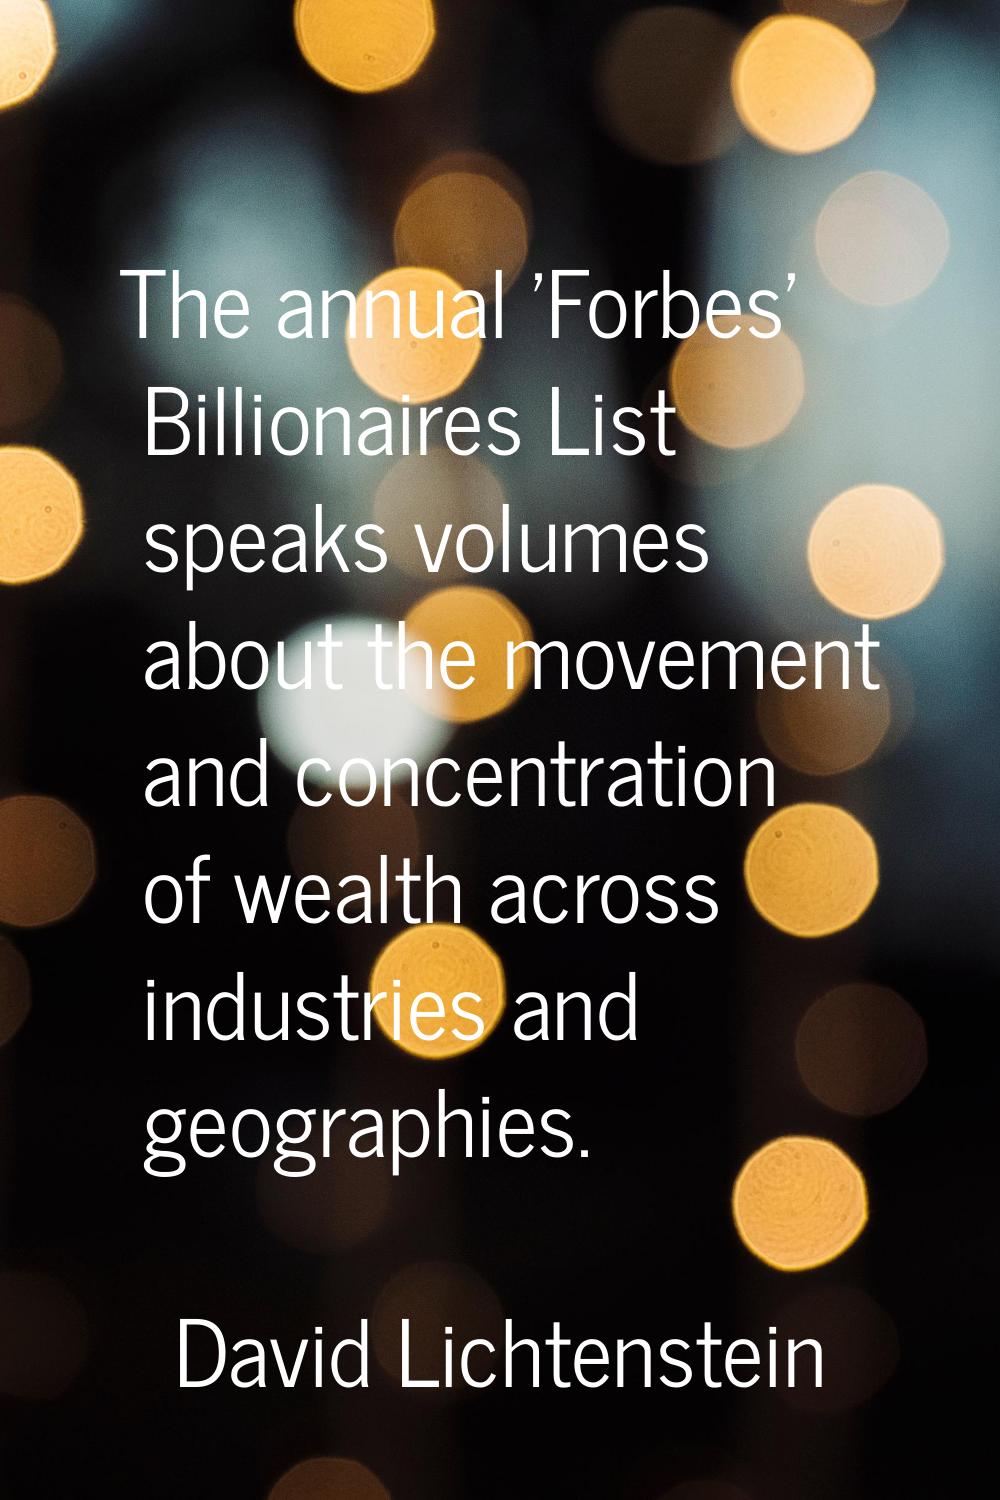 The annual 'Forbes' Billionaires List speaks volumes about the movement and concentration of wealth